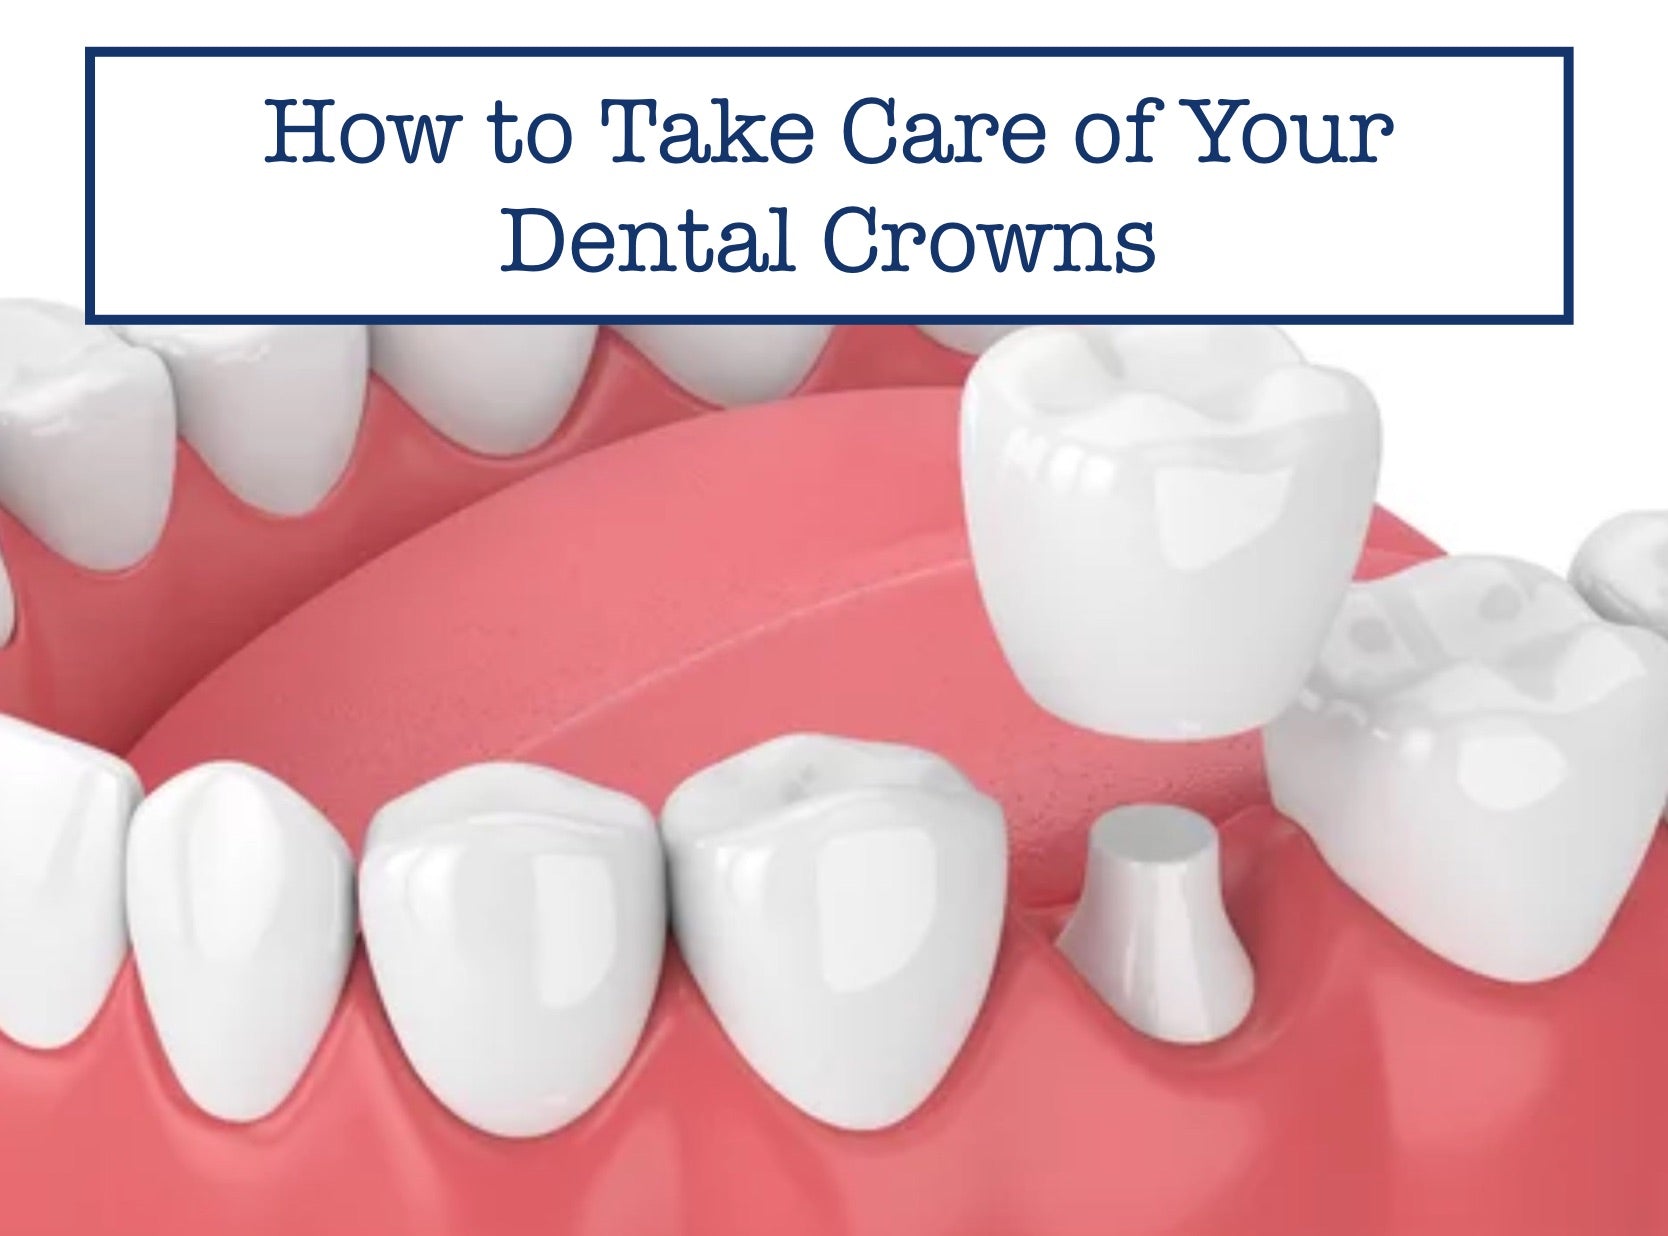 How to Take Care of Your Dental Crowns